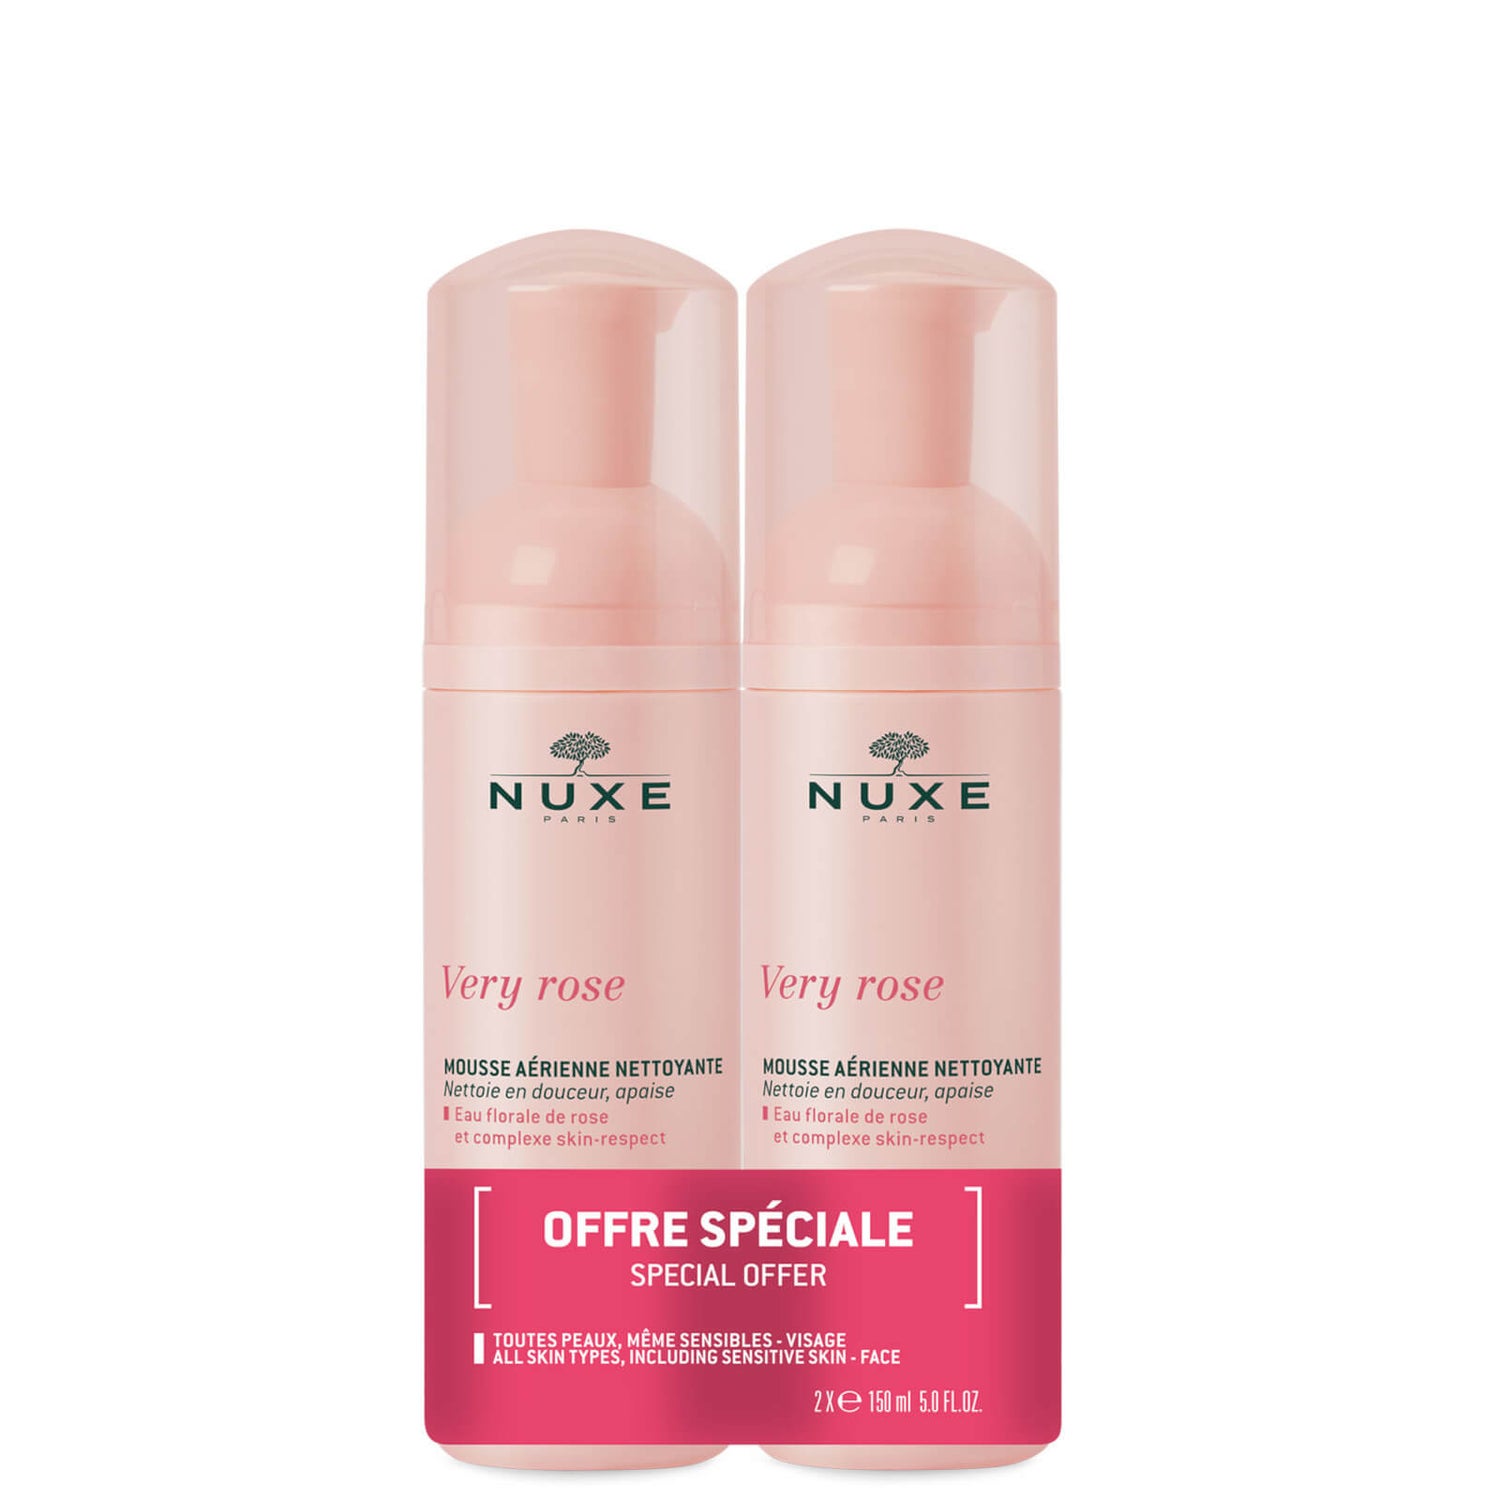 NUXE Very Rose Light Cleansing Foam Duo 2 x 150ml (Worth £31.00)